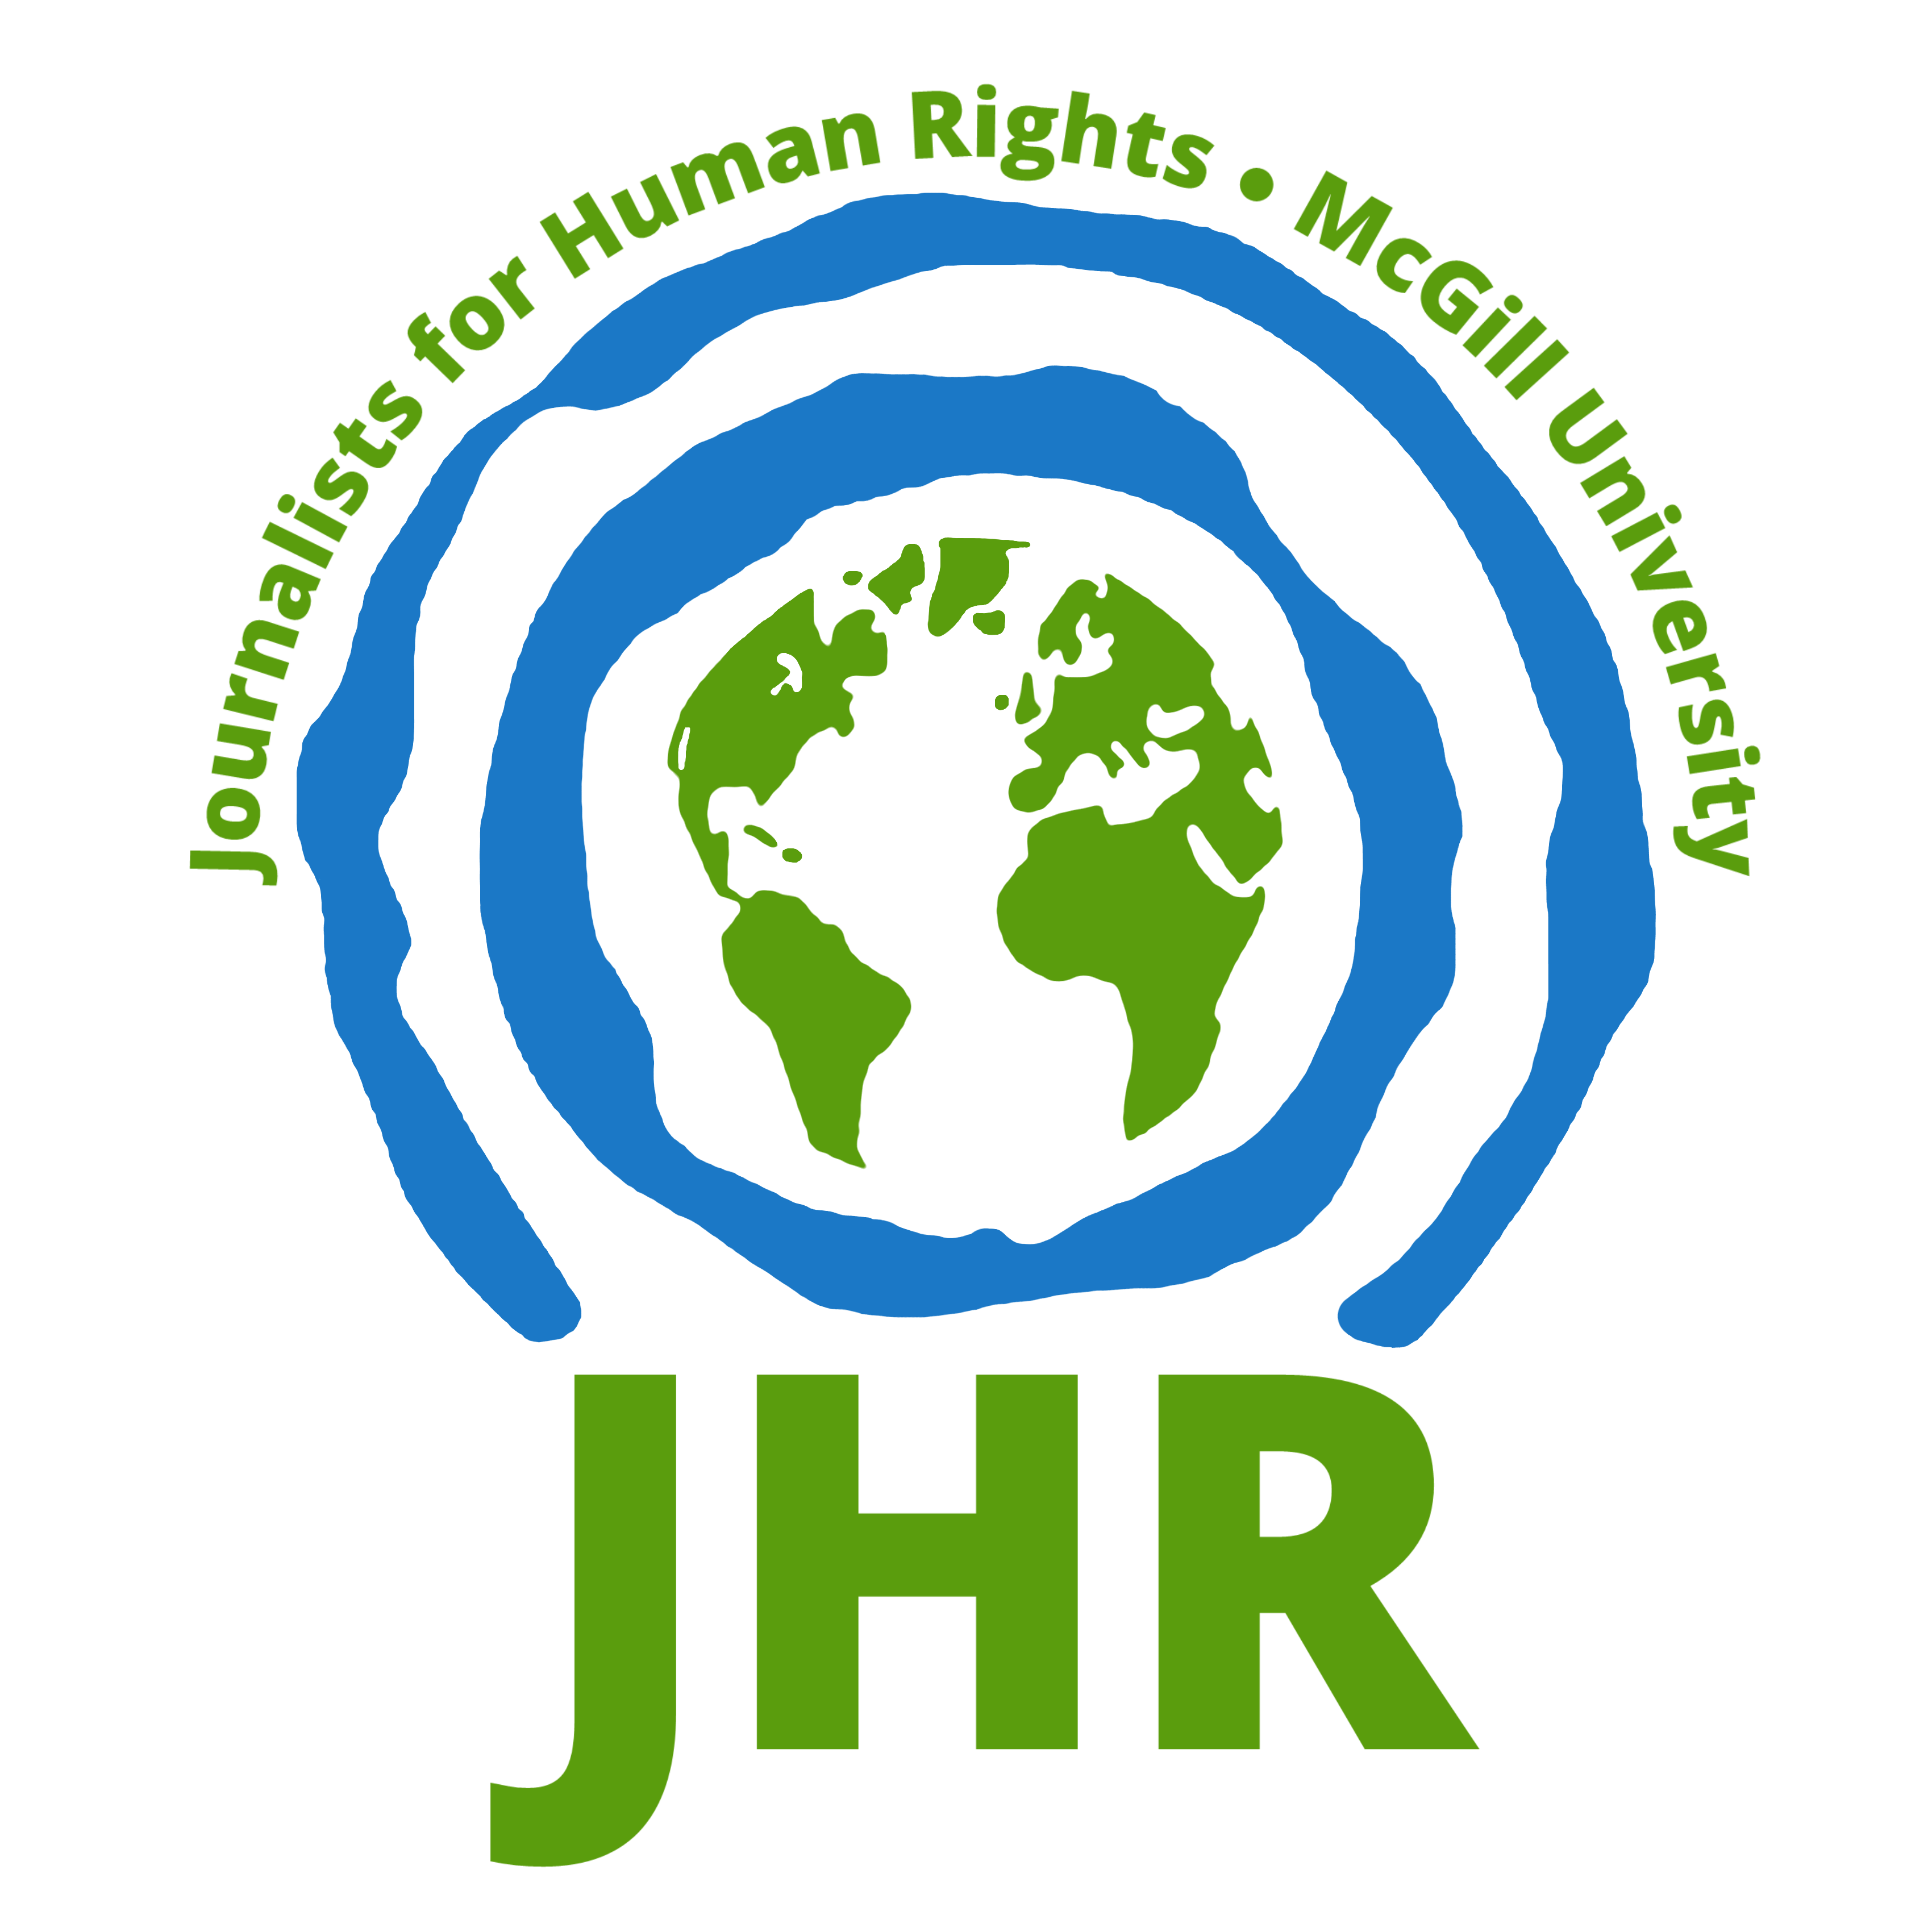 Journalists for Human Rights